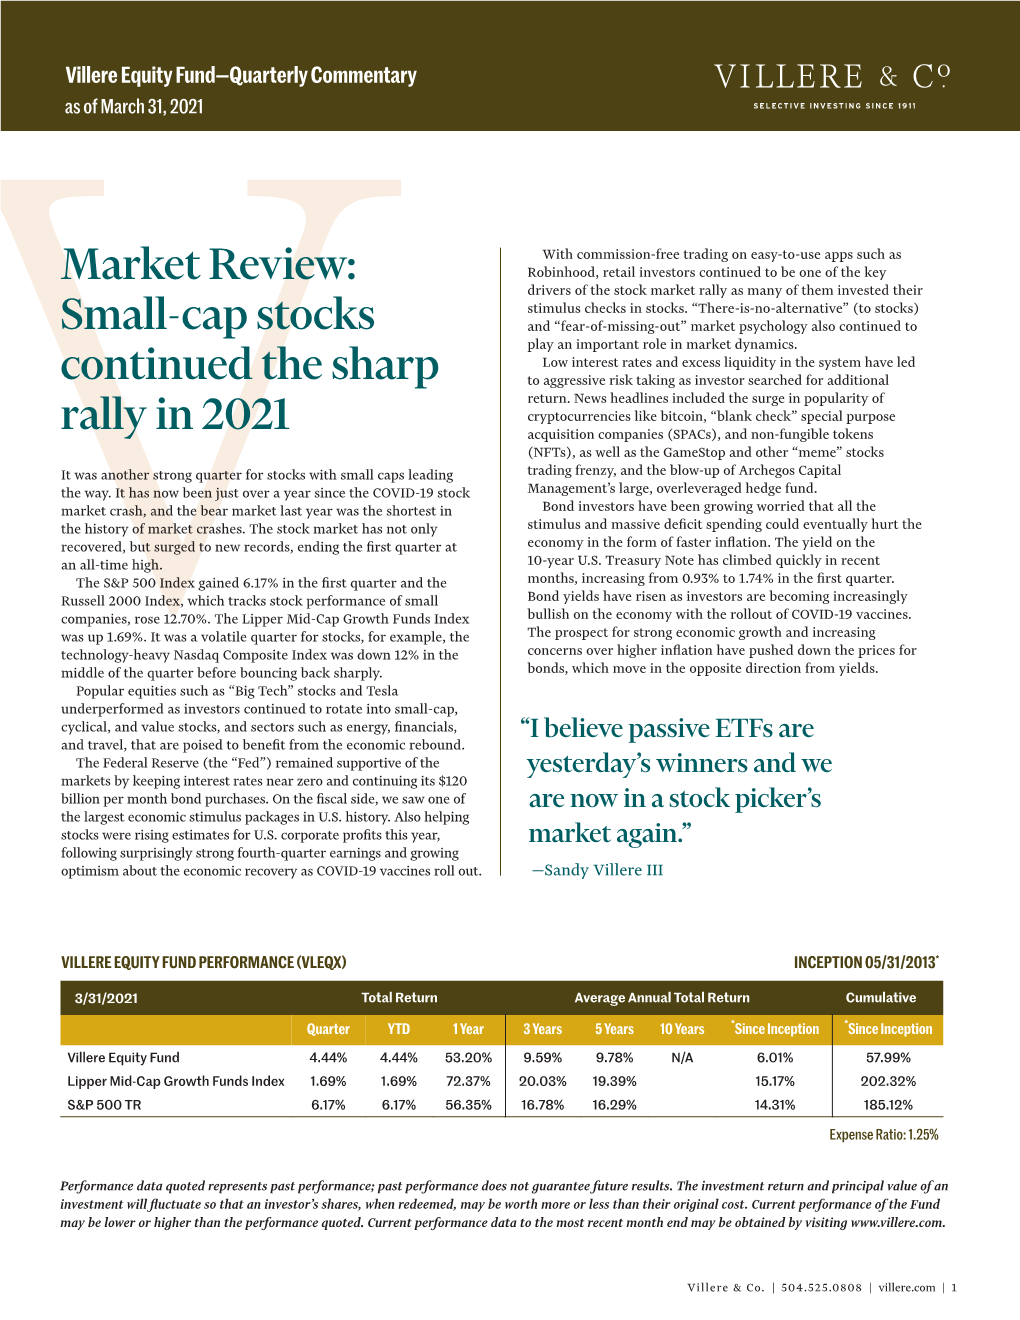 Market Review: Small-Cap Stocks Continued the Sharp Rally in 2021